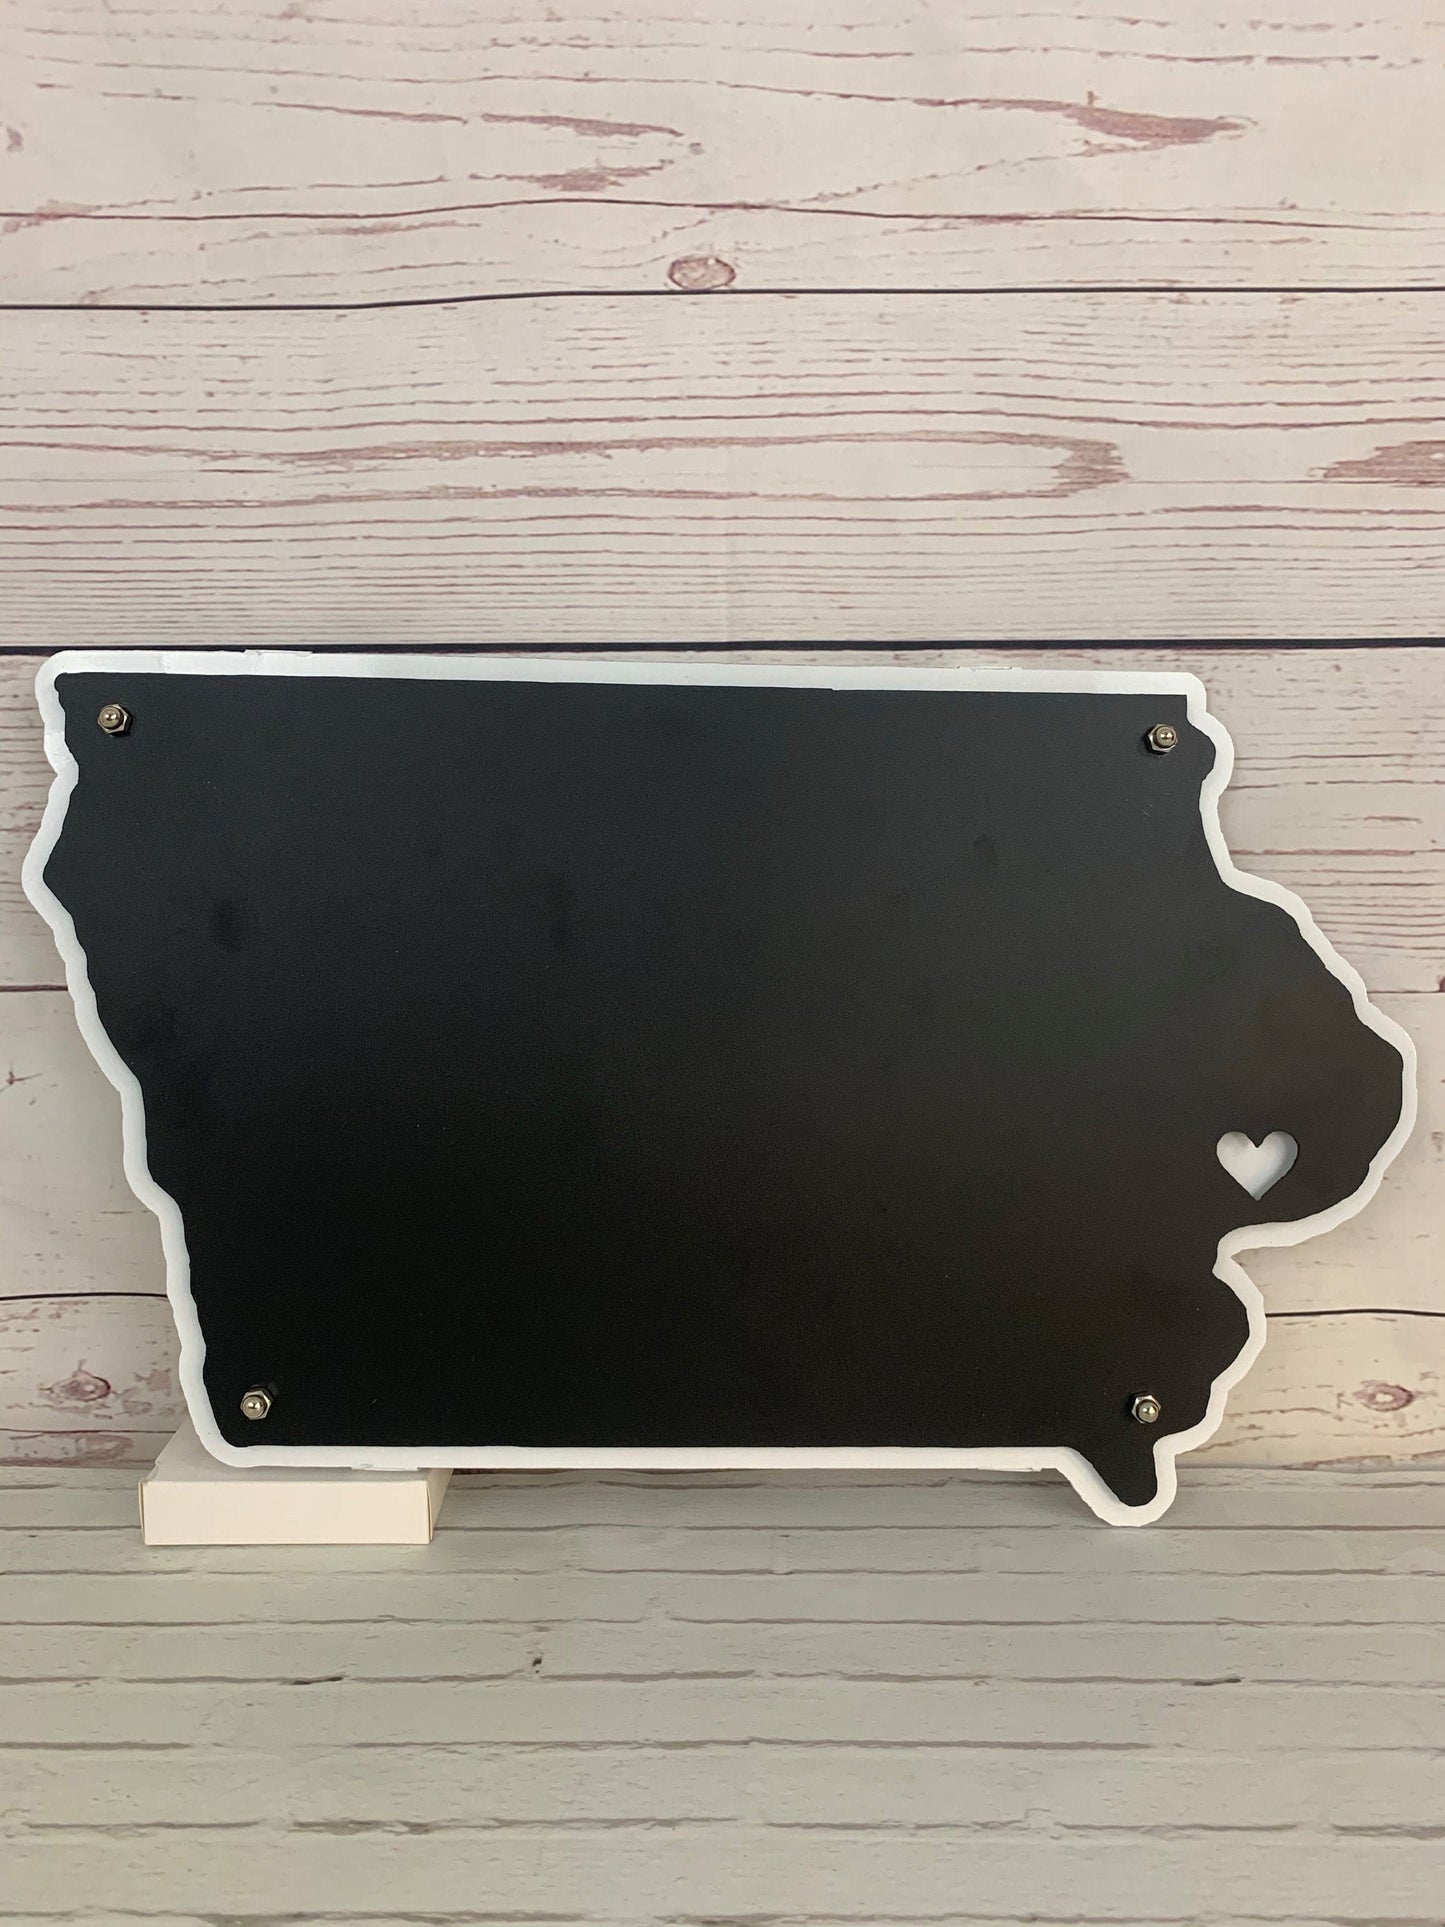 Iowa Shaped Sign with Heart On Location